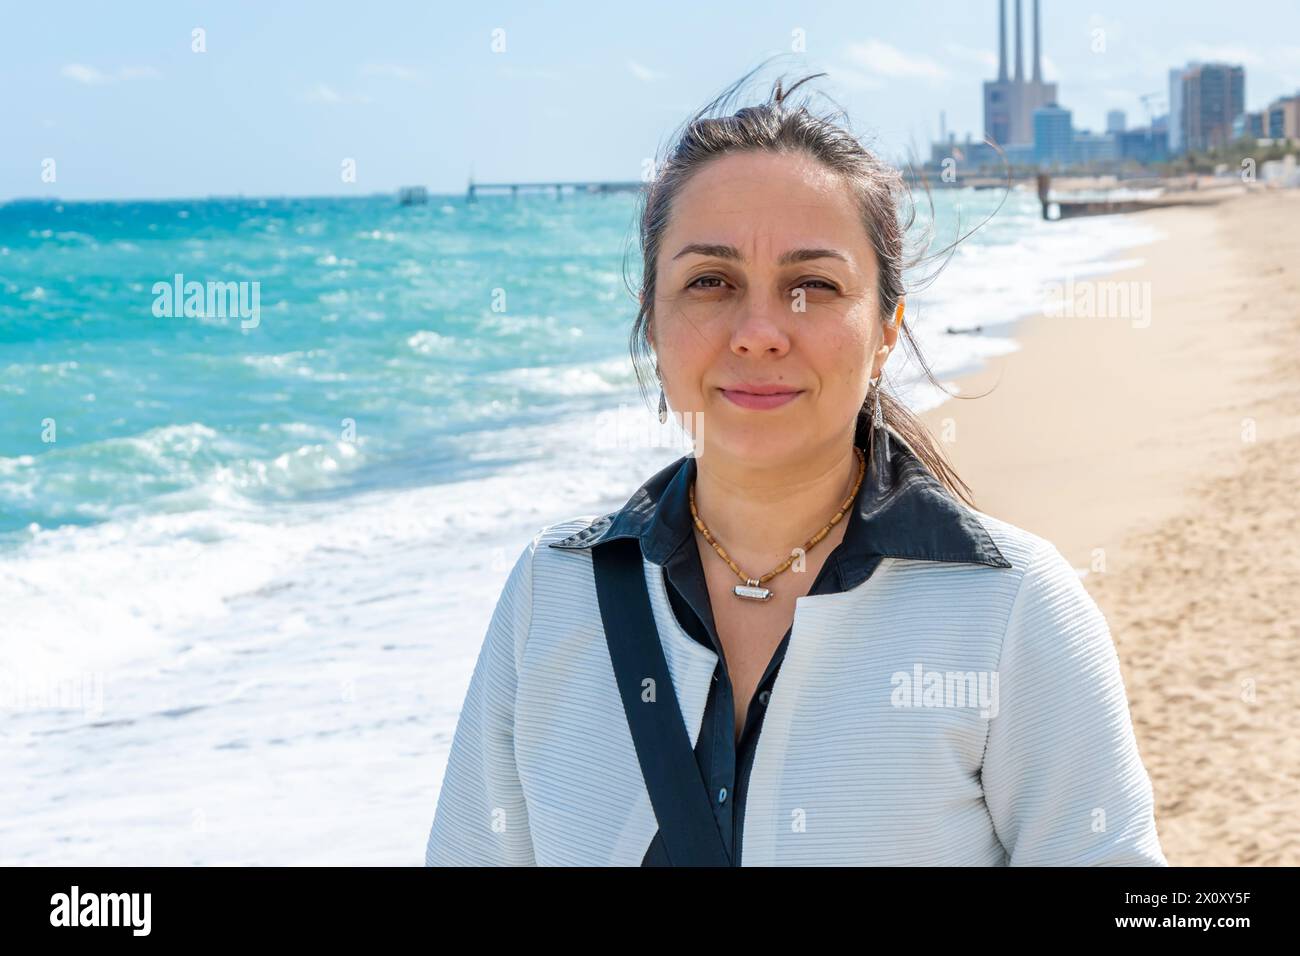 Street portrait of a happy woman 40-45 years old on the background of the sea and beach. Stock Photo